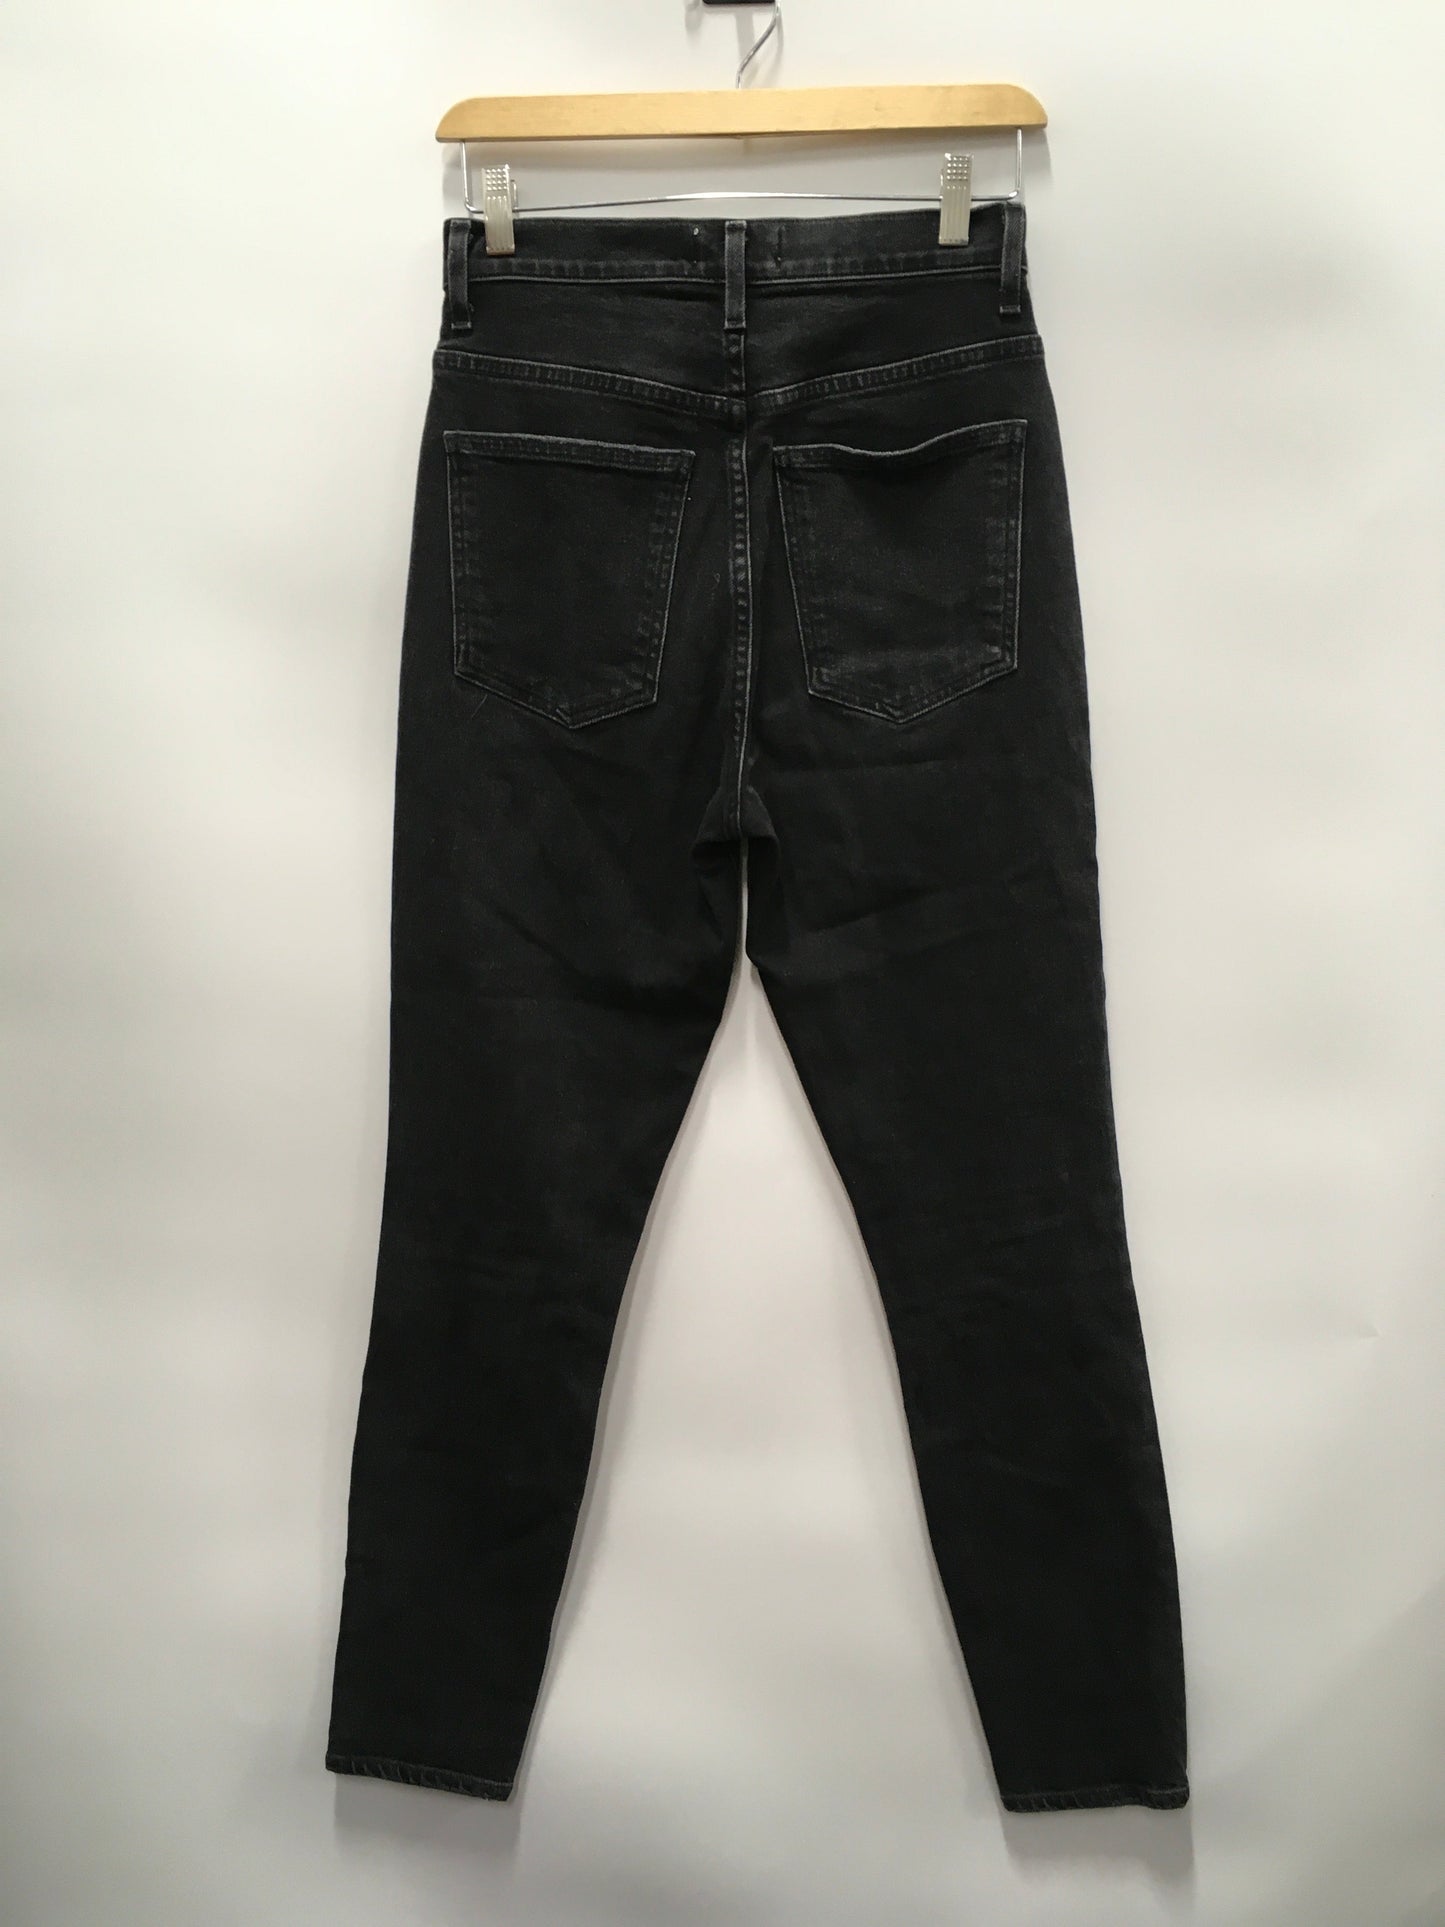 Black Pants Other Agolde, Size 2